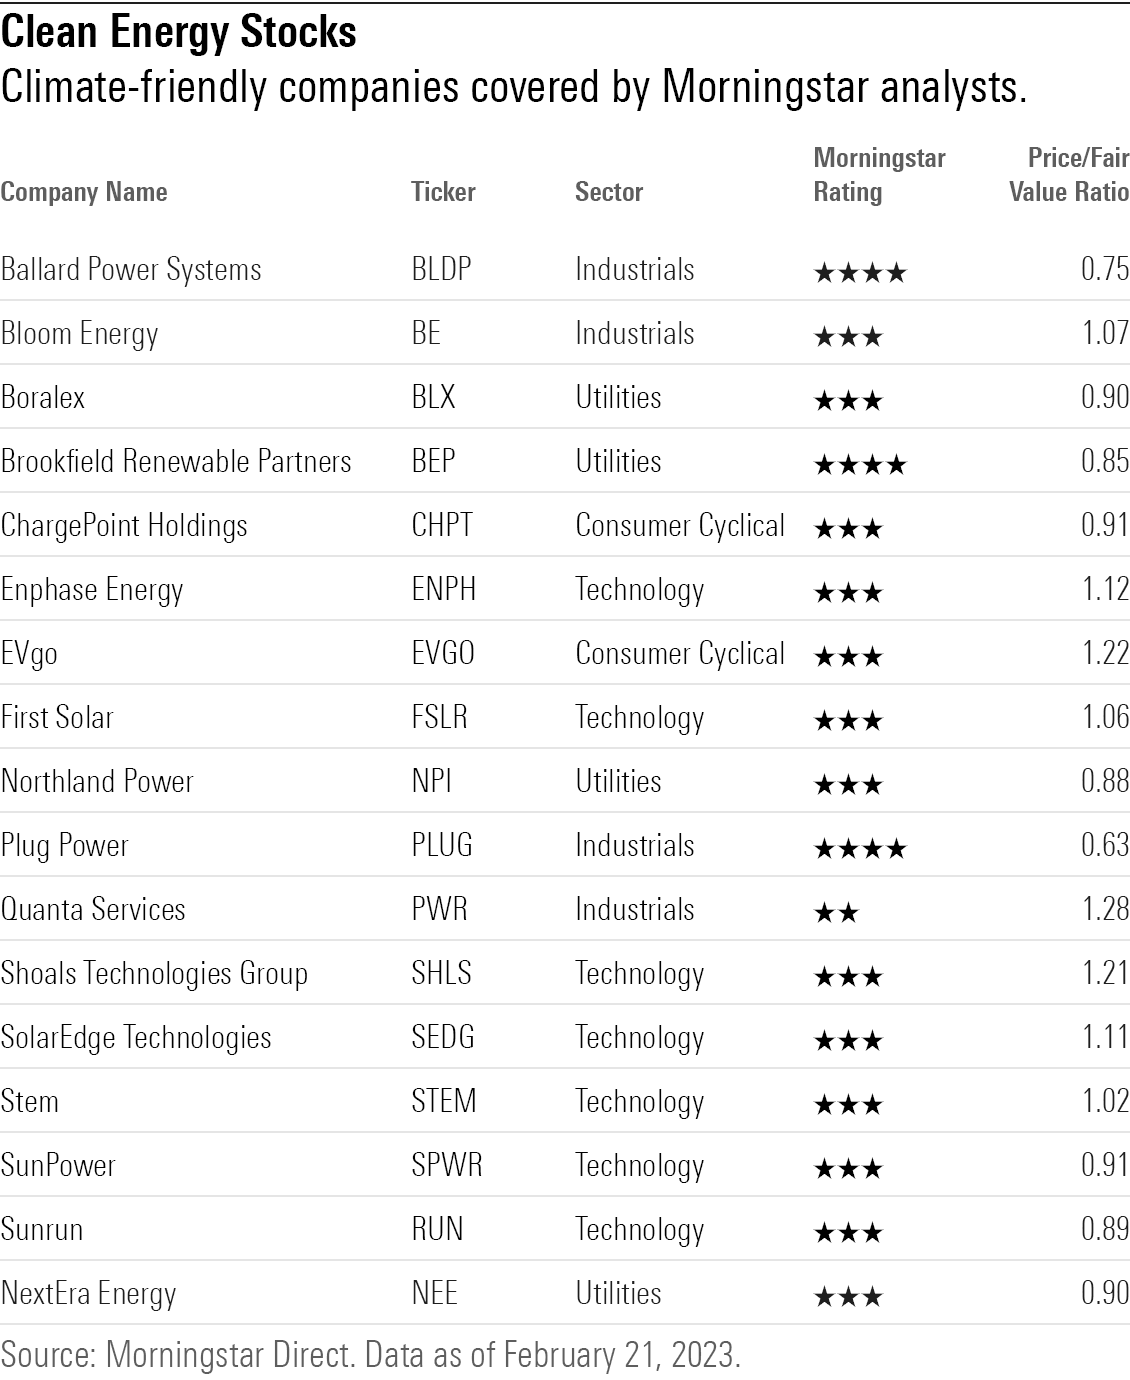 Climate-friendly companies covered by Morningstar analysts.